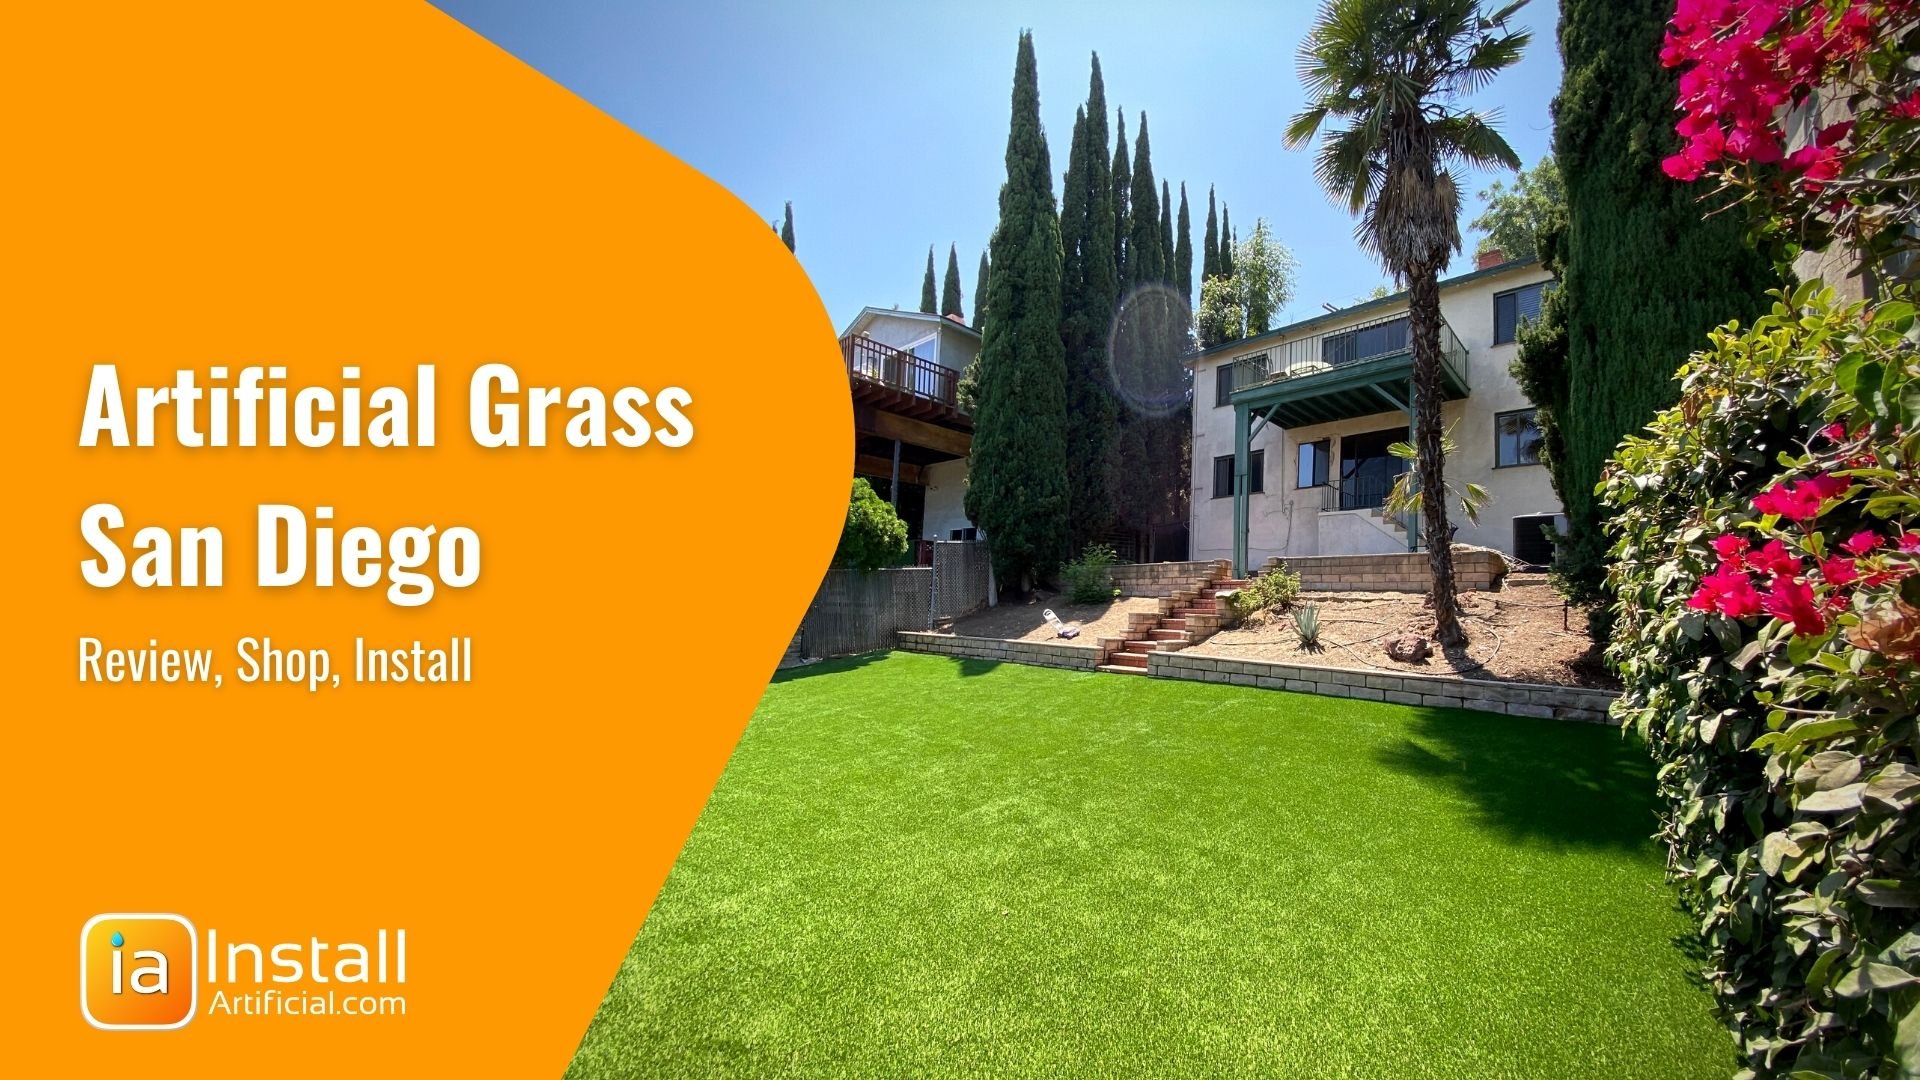 Replace Lawn With Artificial Grass San Diego